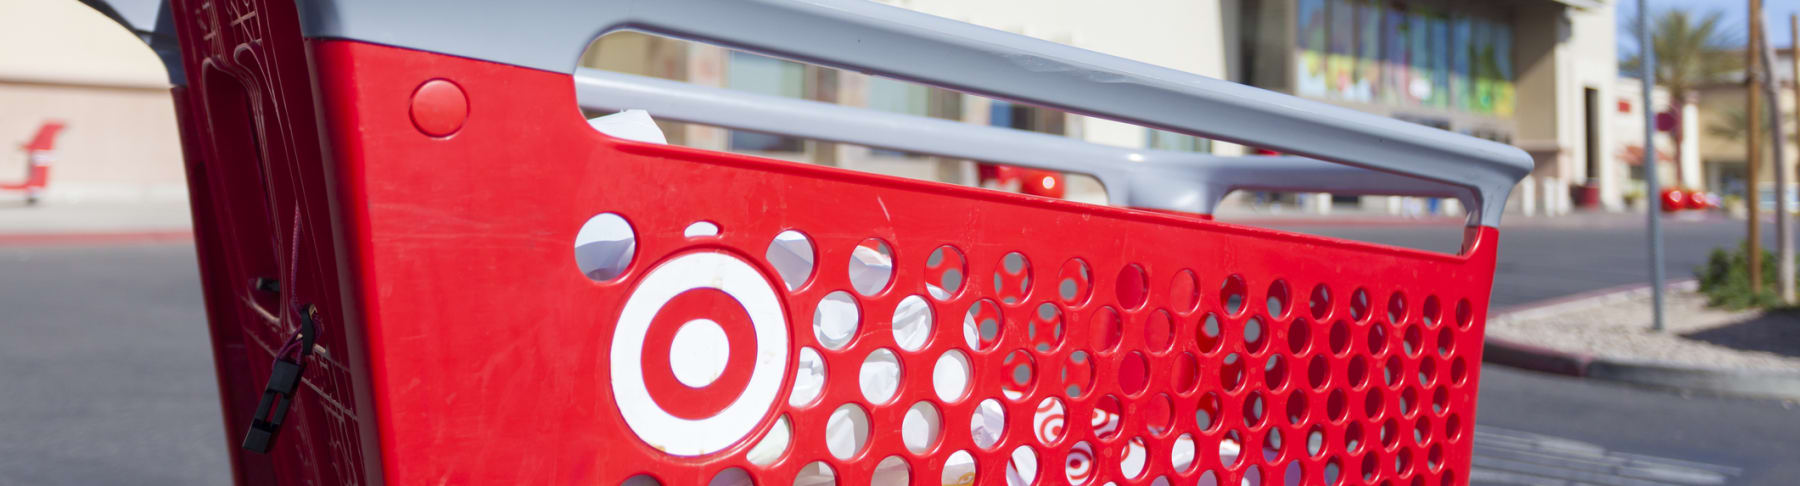 Target shopping cart in front of store.